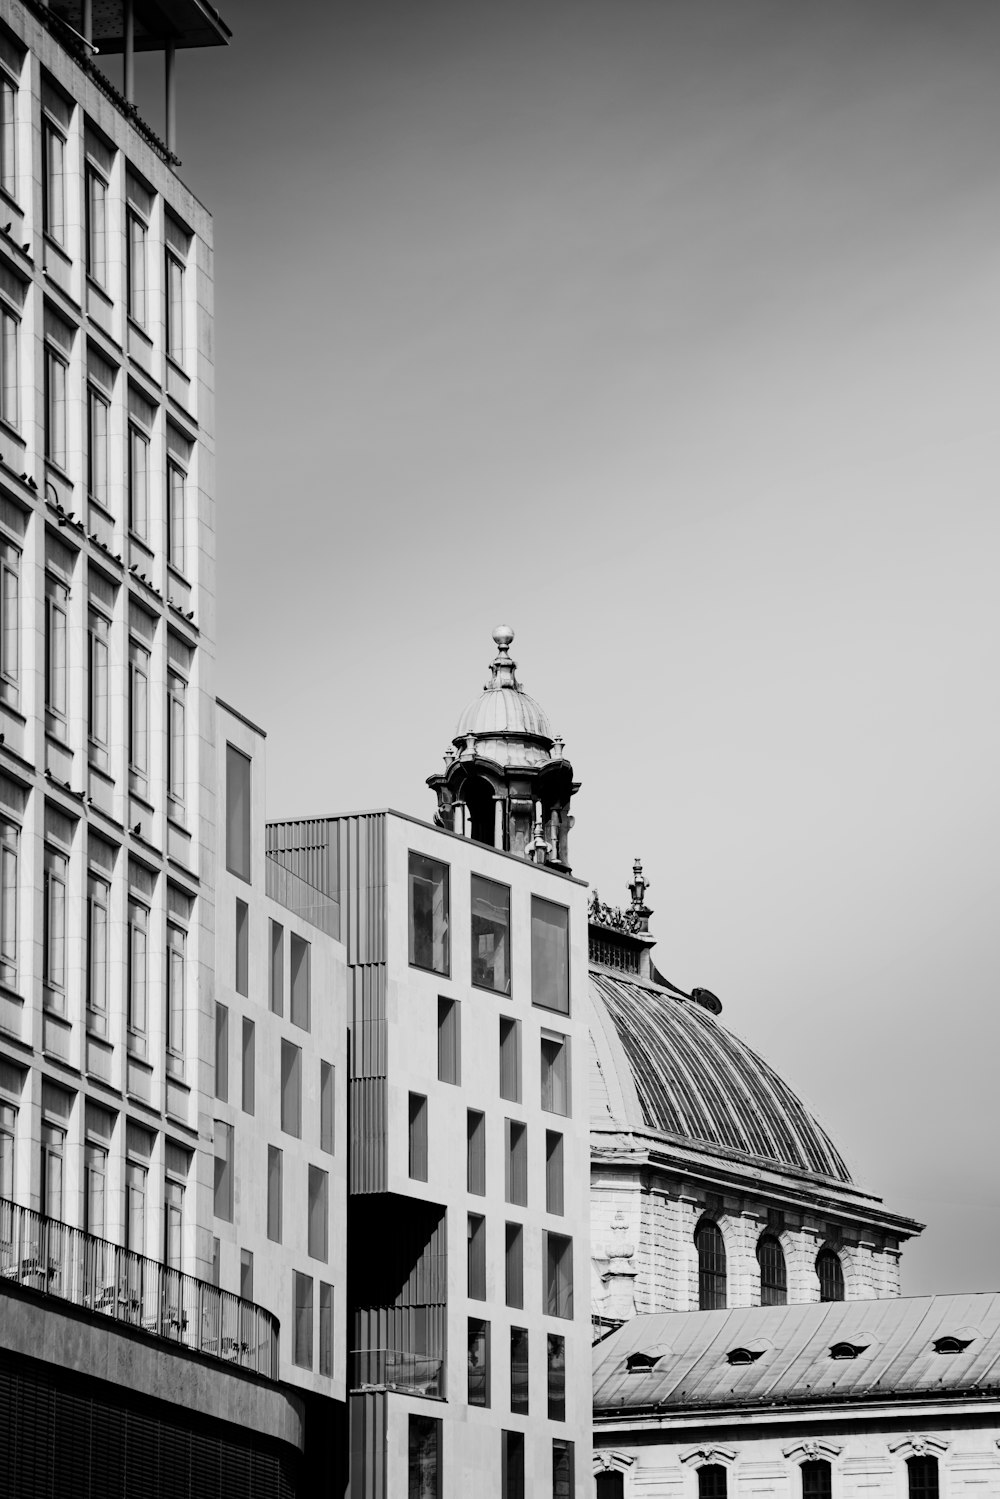 a black and white photo of some buildings